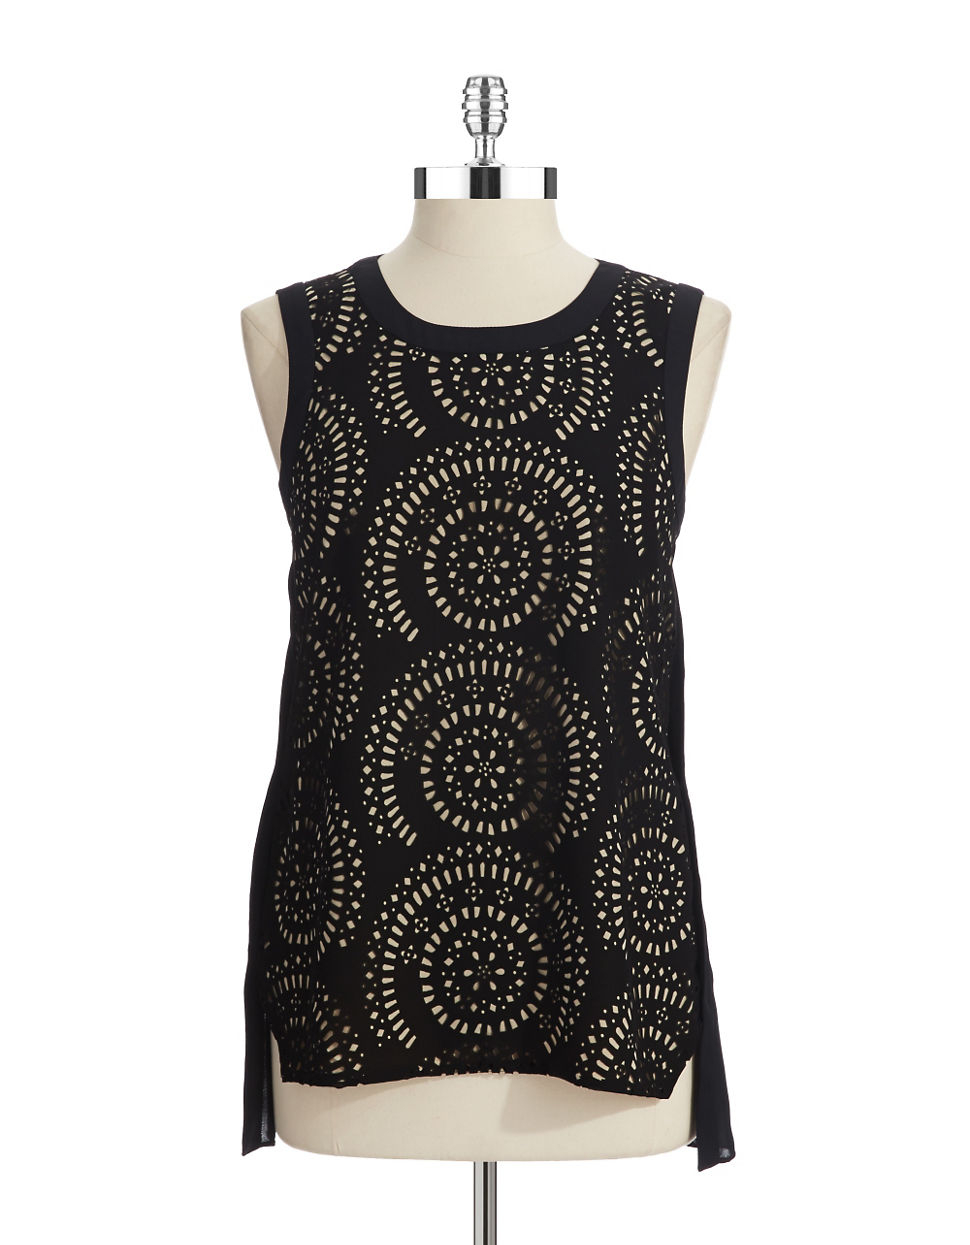 Lyst - Vince camuto Laser Cut Tank in Black